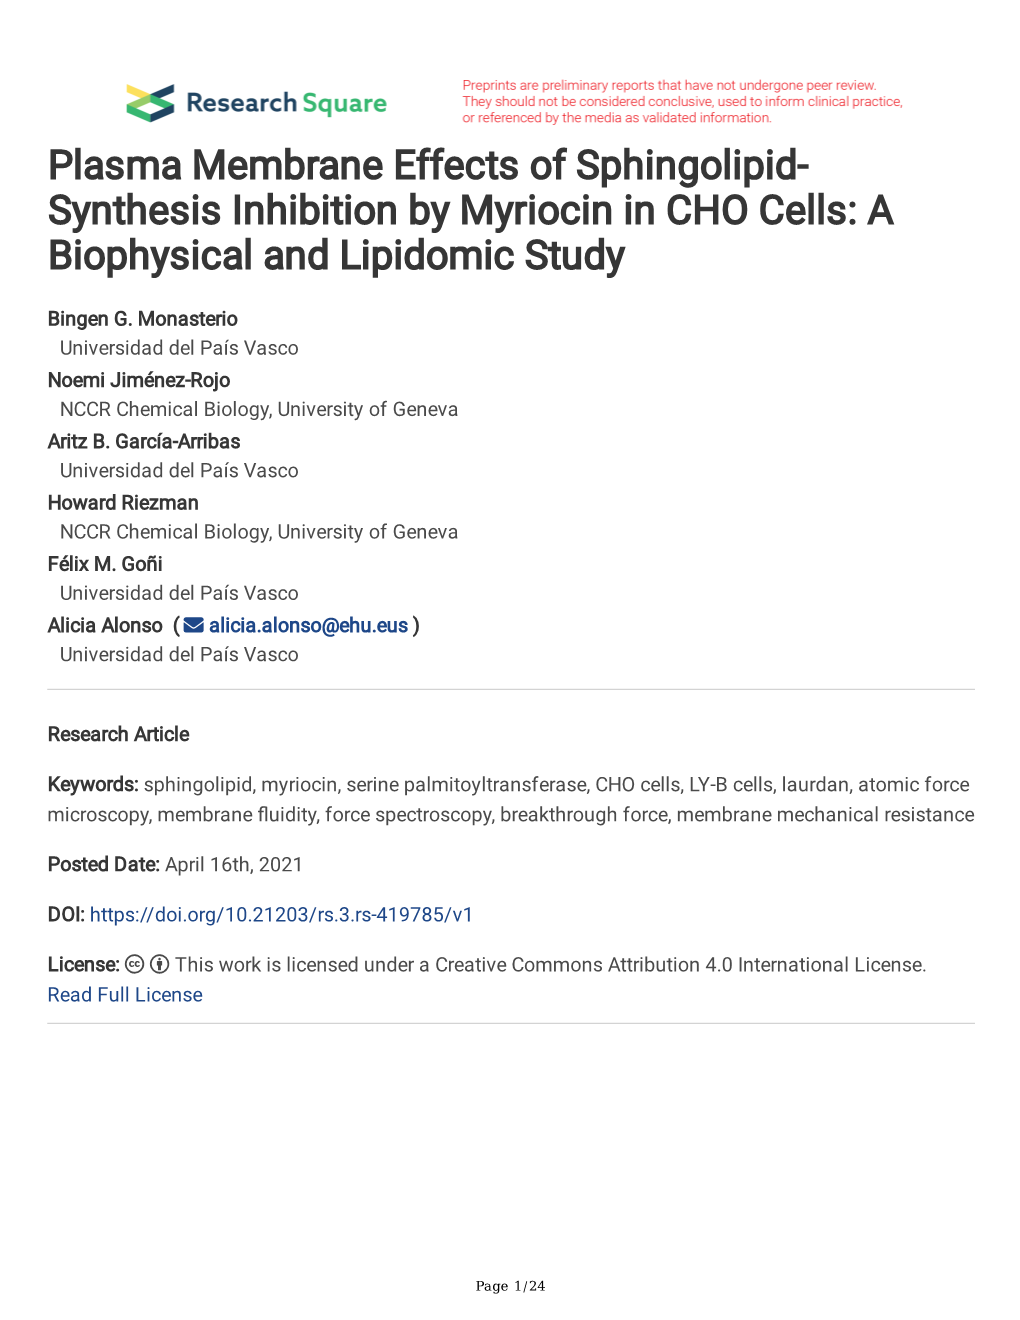 Synthesis Inhibition by Myriocin in CHO Cells: a Biophysical and Lipidomic Study